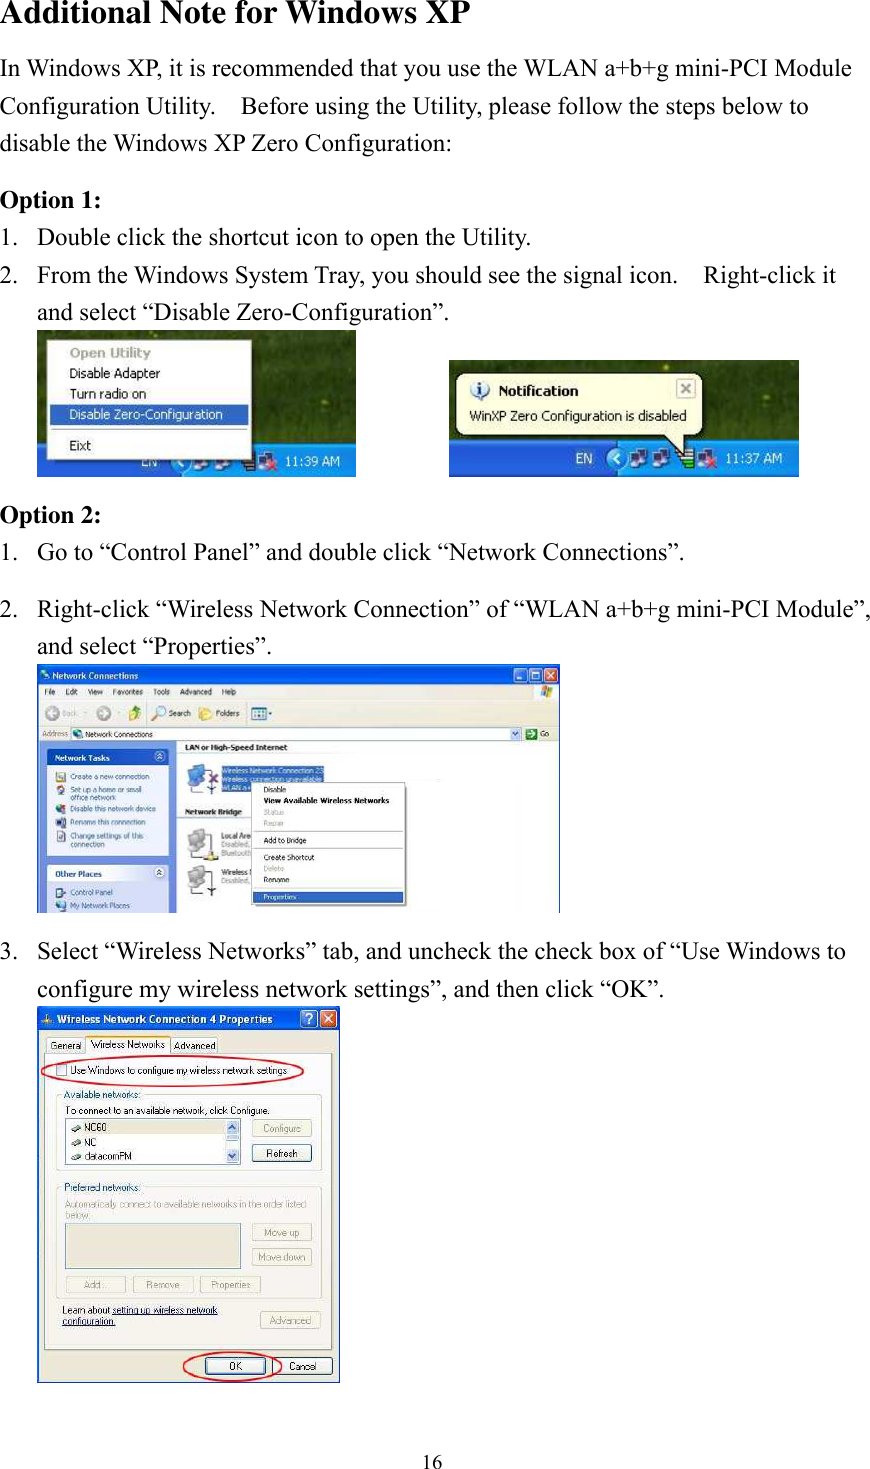  16Additional Note for Windows XP   In Windows XP, it is recommended that you use the WLAN a+b+g mini-PCI Module Configuration Utility.    Before using the Utility, please follow the steps below to disable the Windows XP Zero Configuration:  Option 1: 1.  Double click the shortcut icon to open the Utility. 2.  From the Windows System Tray, you should see the signal icon.    Right-click it and select “Disable Zero-Configuration”.     Option 2: 1.  Go to “Control Panel” and double click “Network Connections”.  2.  Right-click “Wireless Network Connection” of “WLAN a+b+g mini-PCI Module”, and select “Properties”.   3.  Select “Wireless Networks” tab, and uncheck the check box of “Use Windows to configure my wireless network settings”, and then click “OK”.  